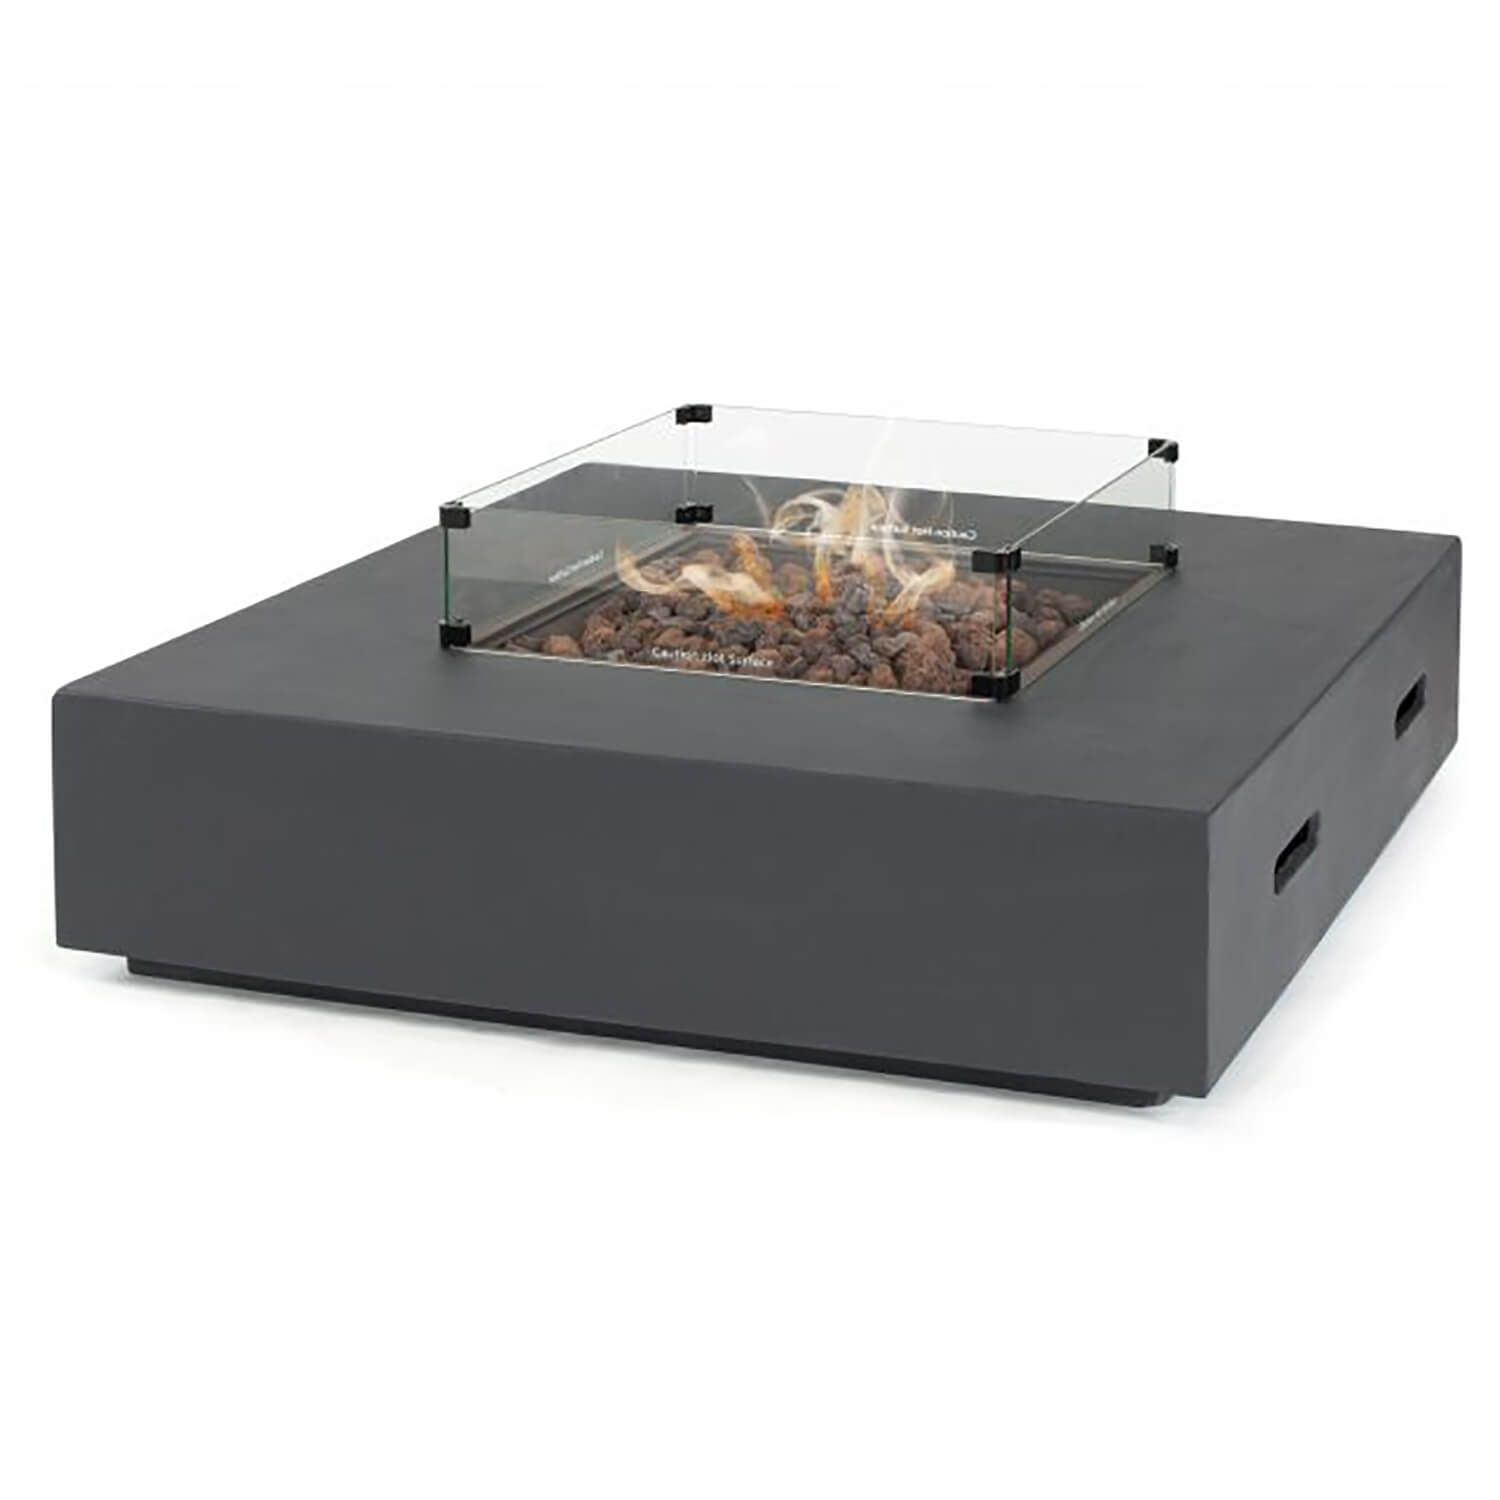 Kettler Kalos Universal Coffee Table, Glass Fire Pit Glass